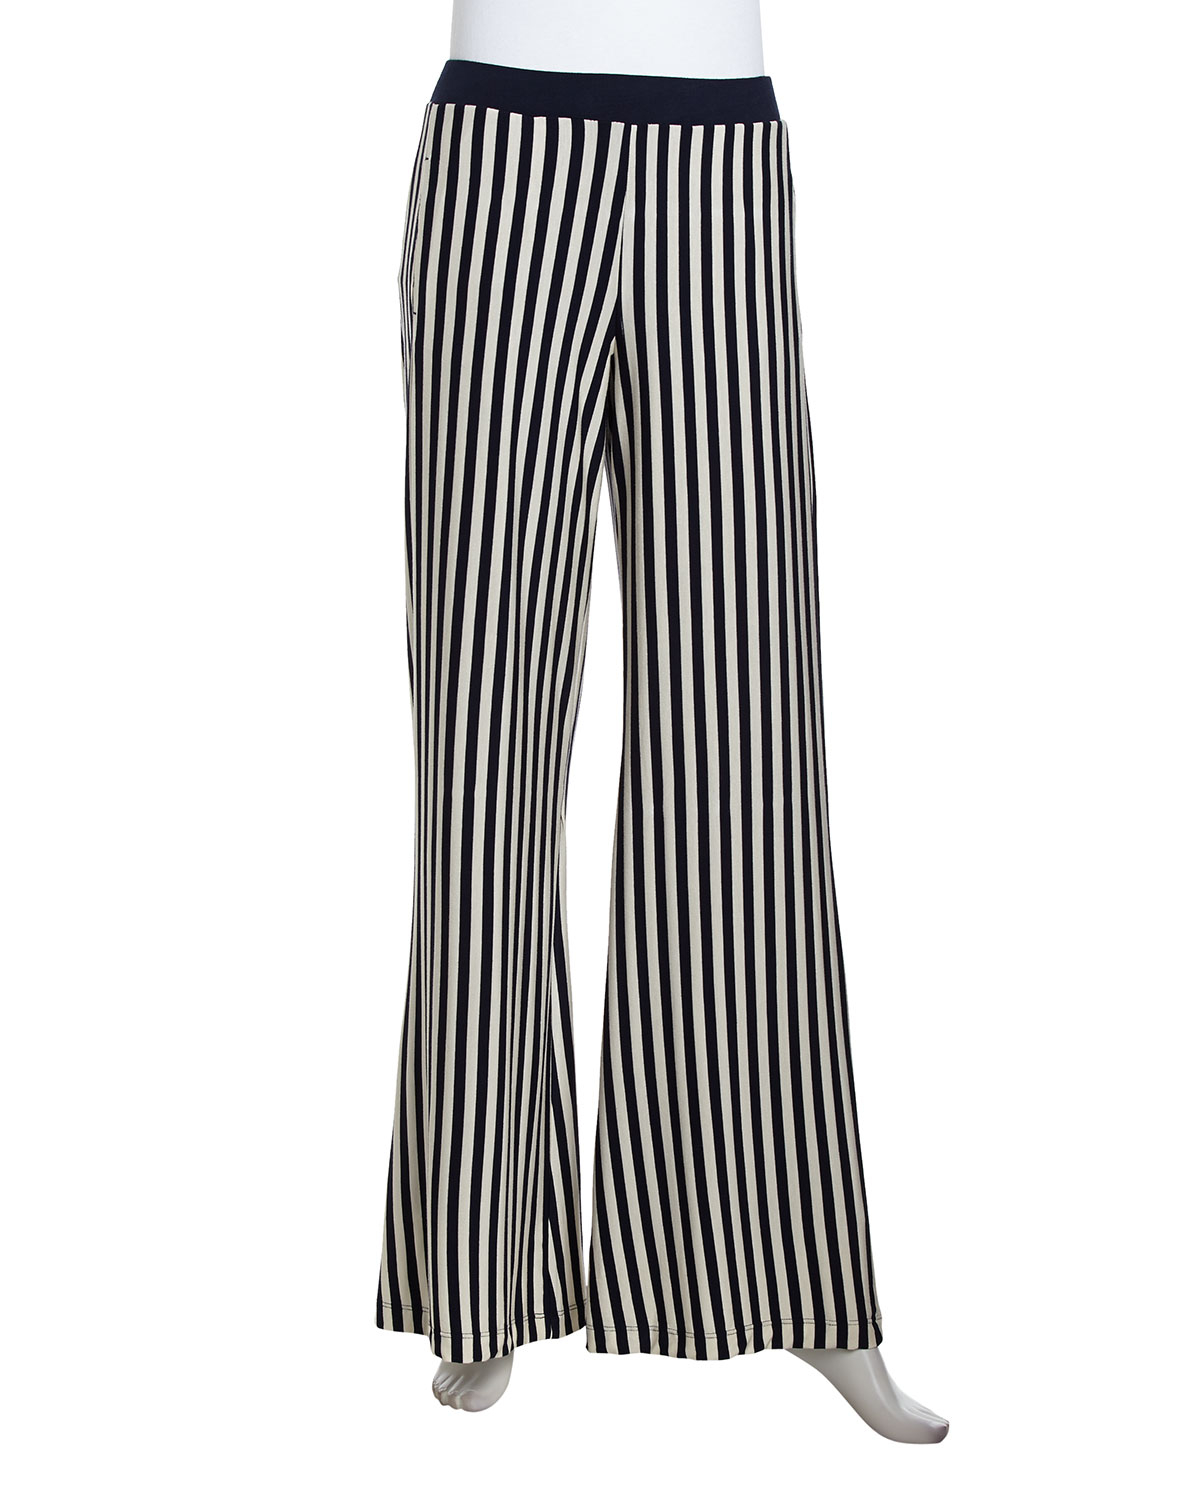 Philosophy Striped Stretch Palazzo Pants in Blue (navy) | Lyst